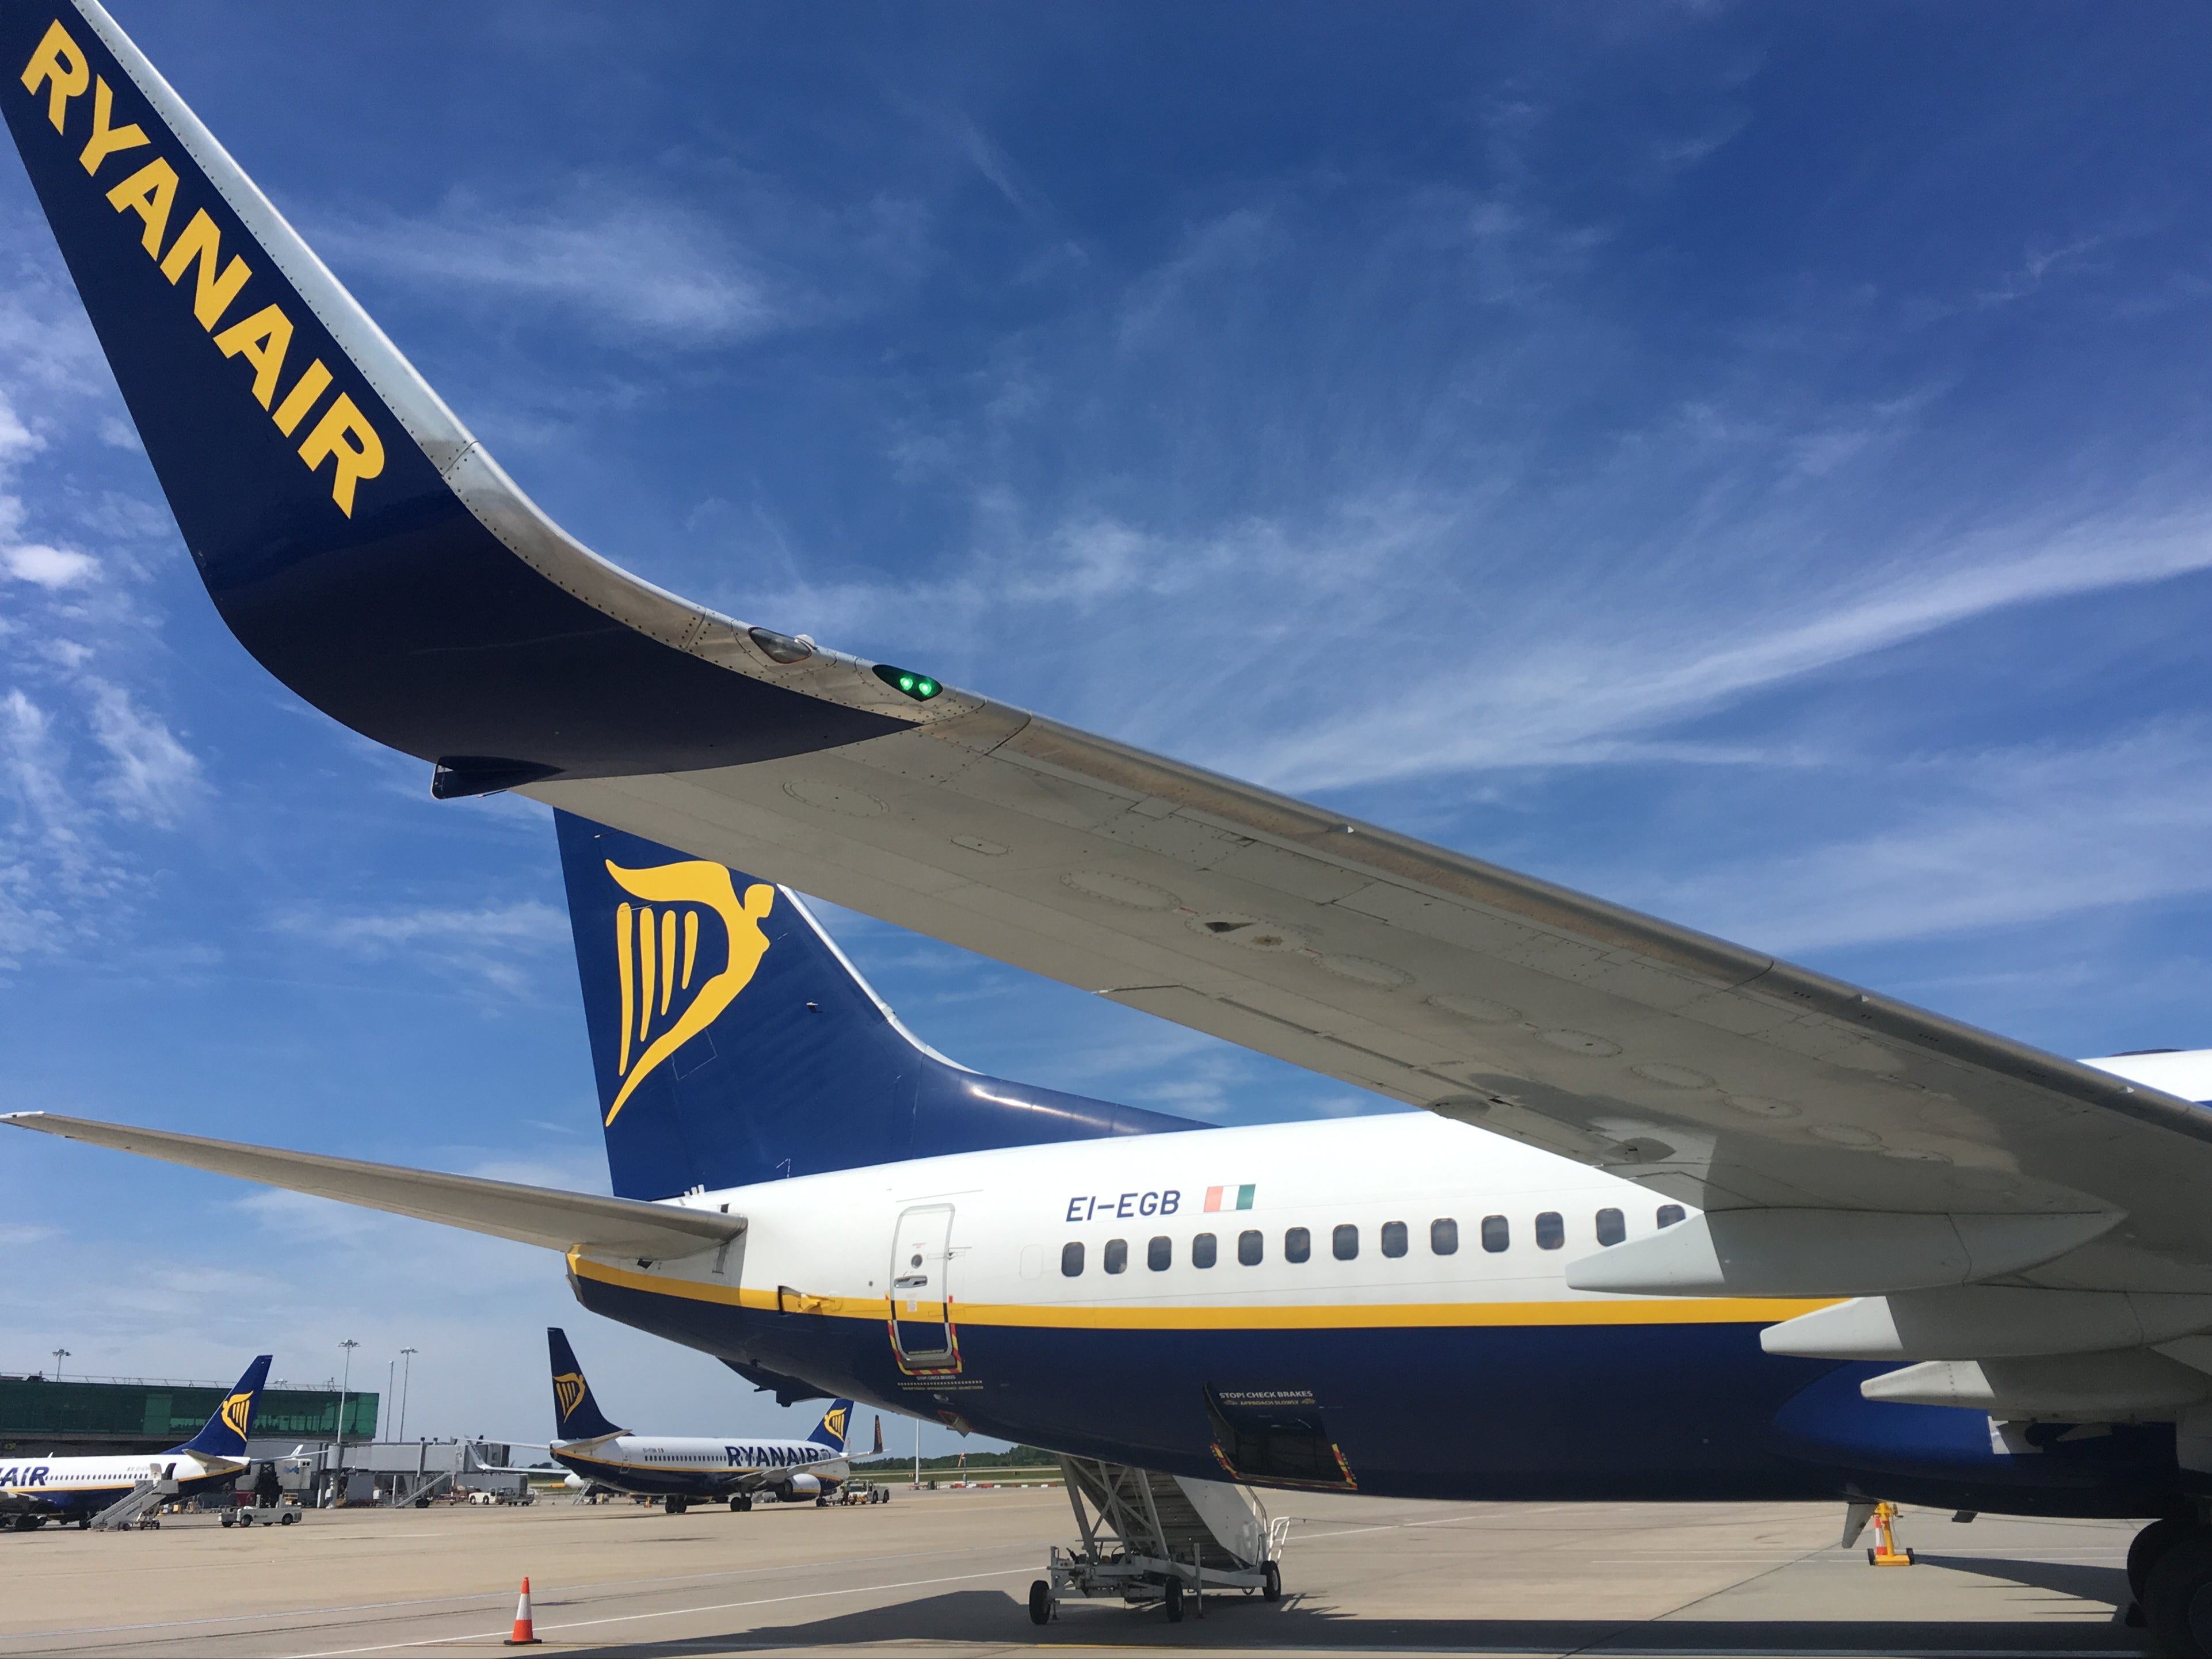 Ryanair assigns seats to passengers who choose not to pay for a specific place